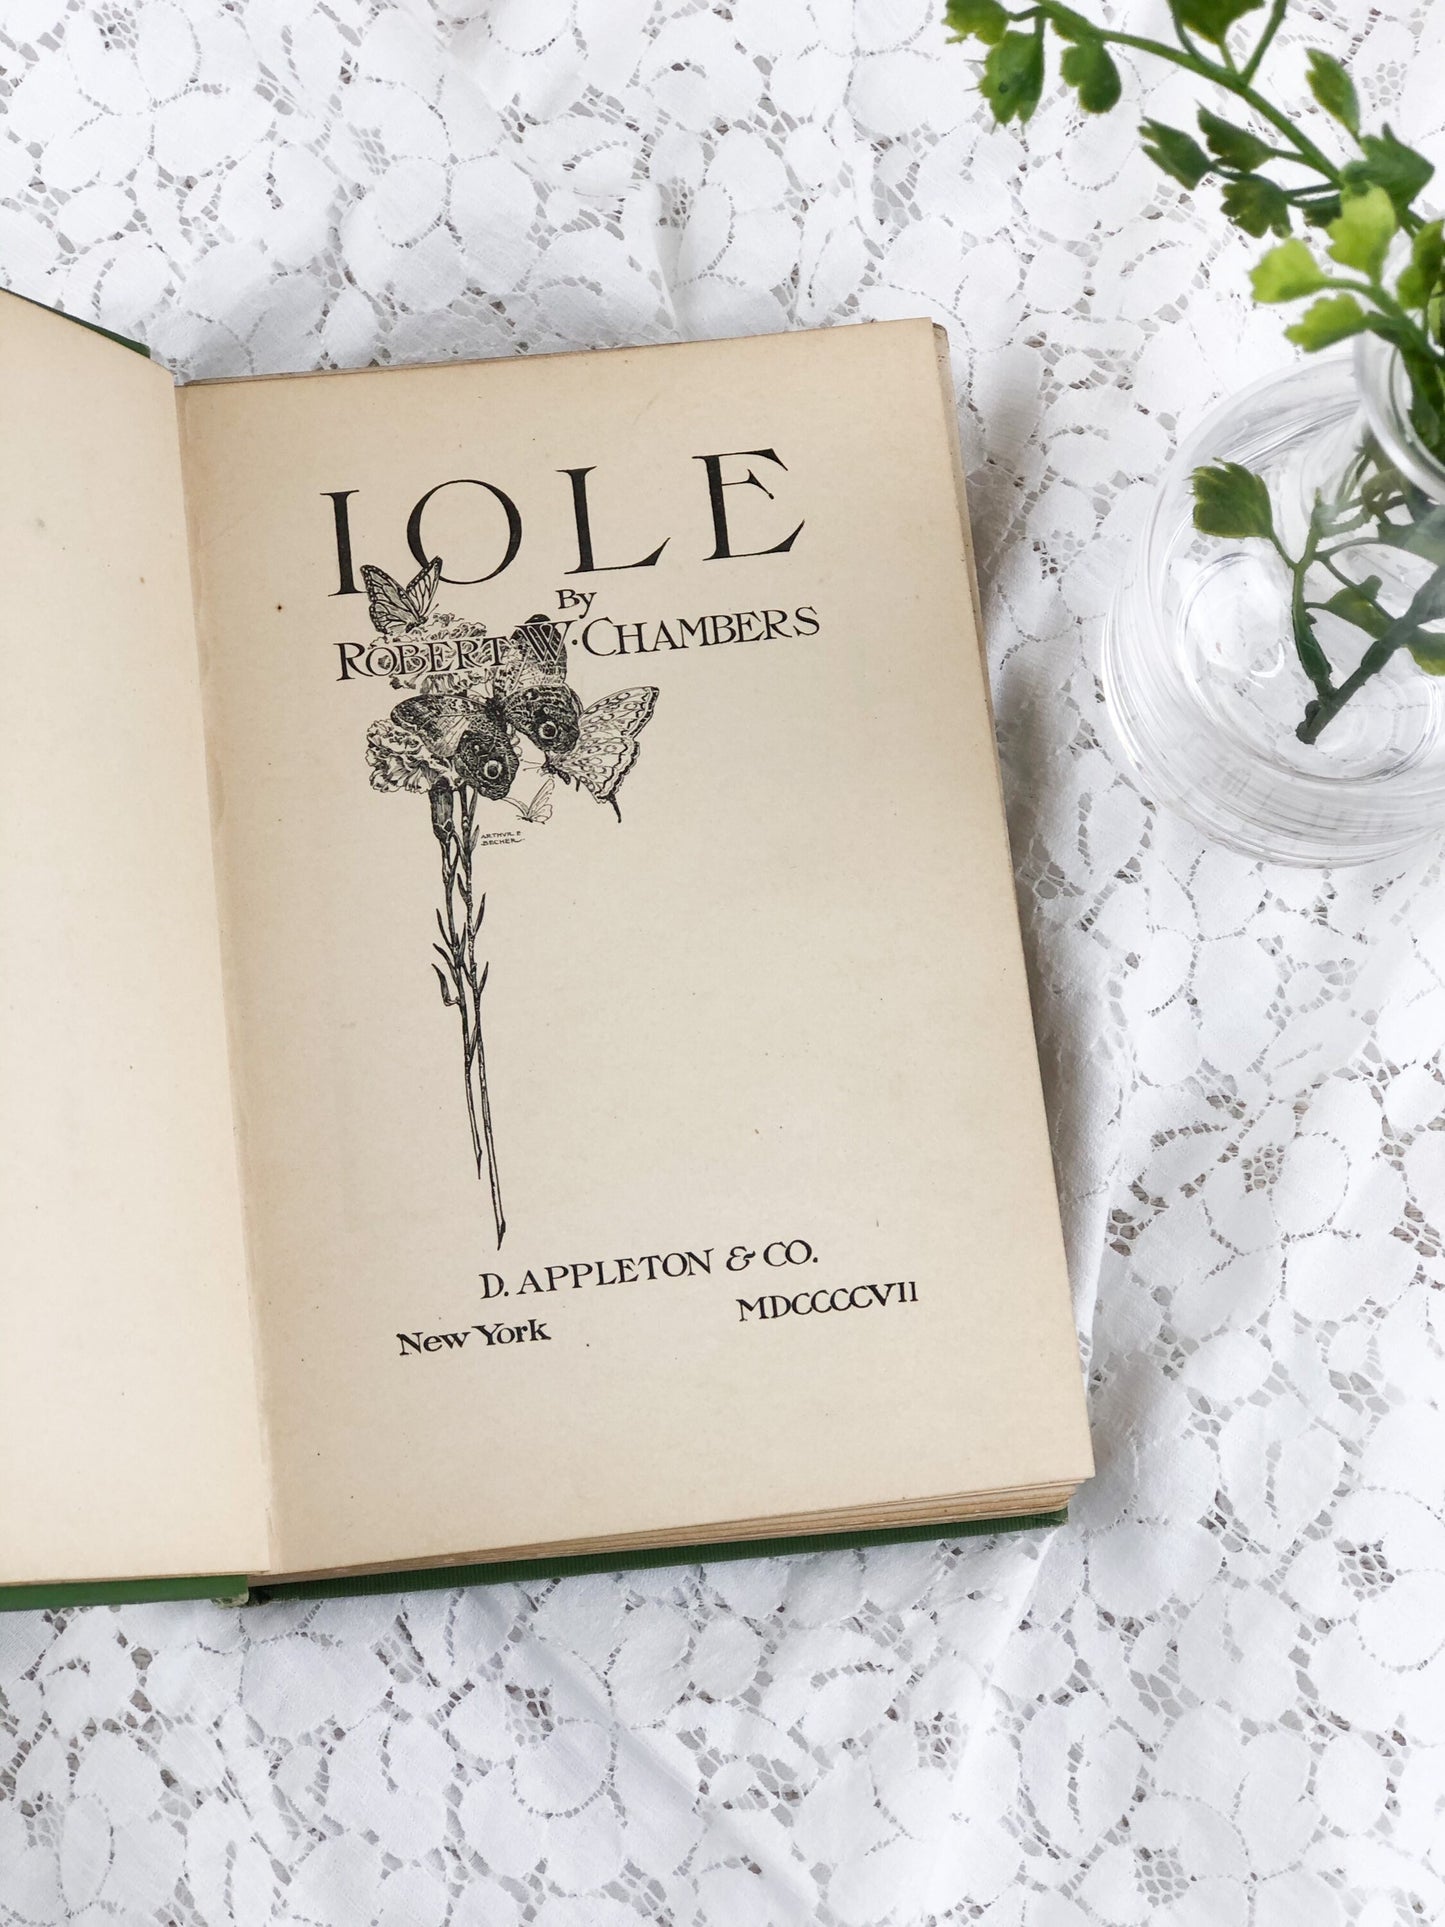 Rare Book, Iole by Robert W Chambers